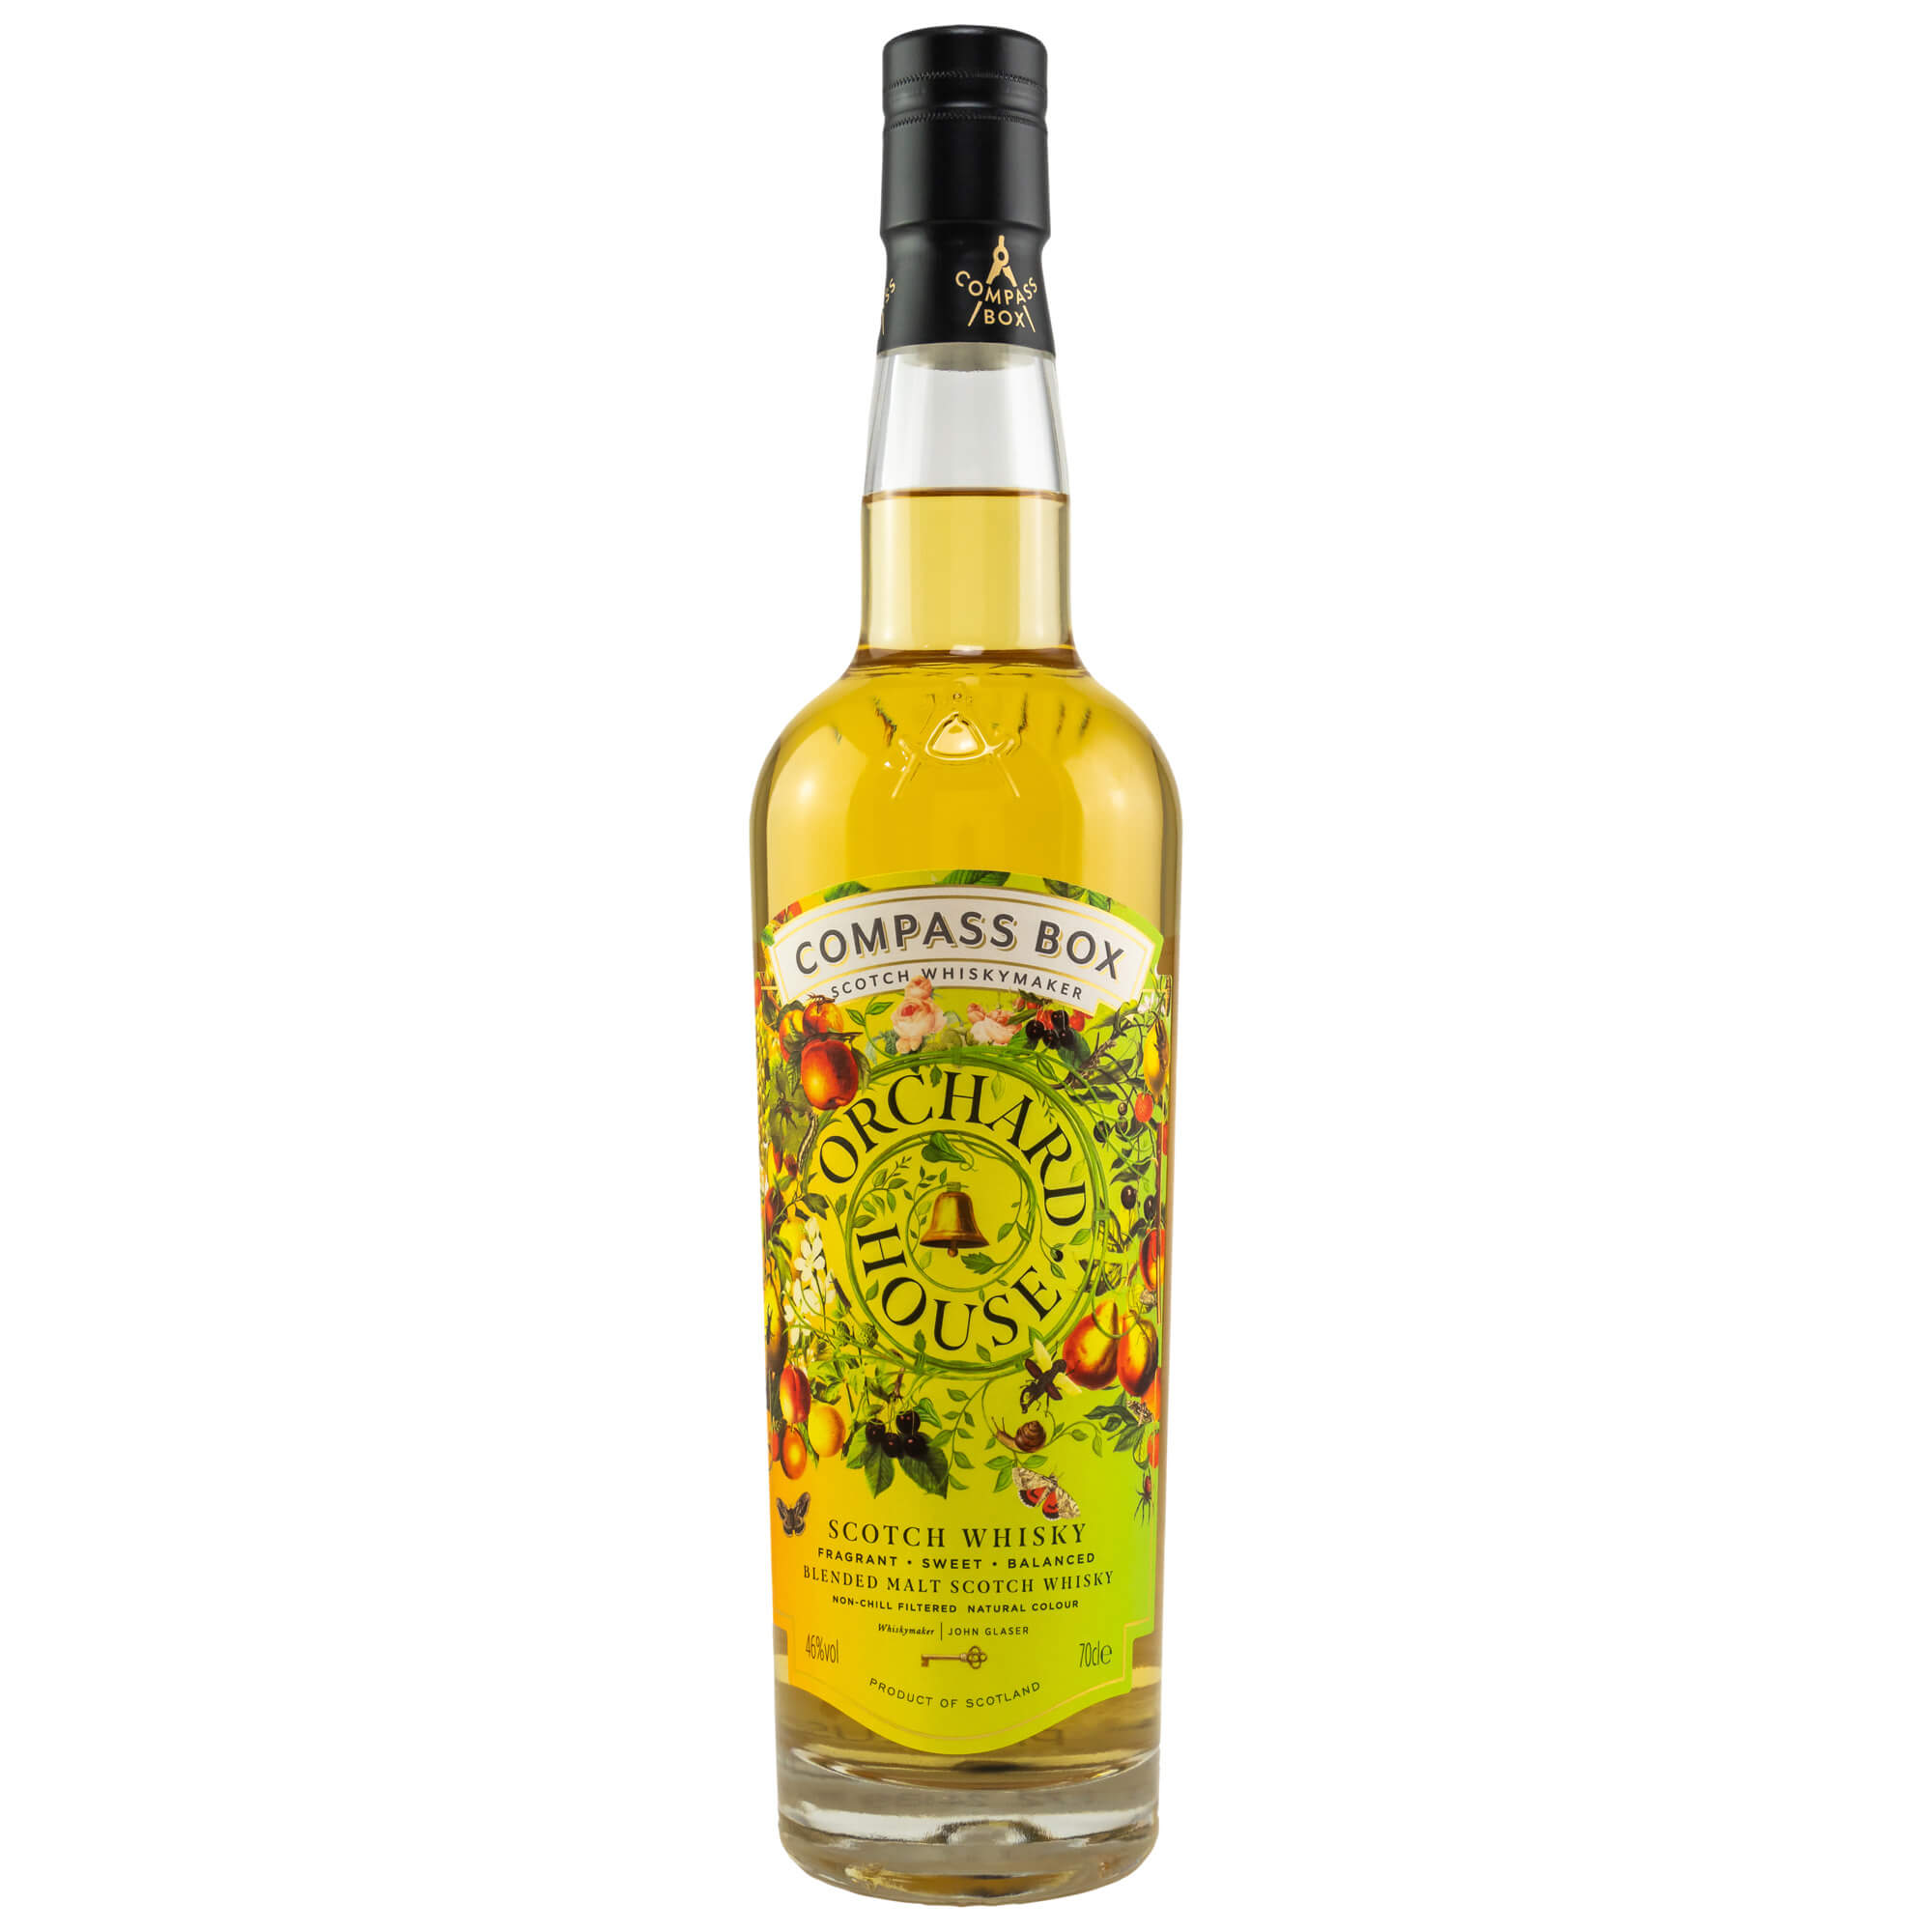 Flasche The Orchard House Compass Box Whisky